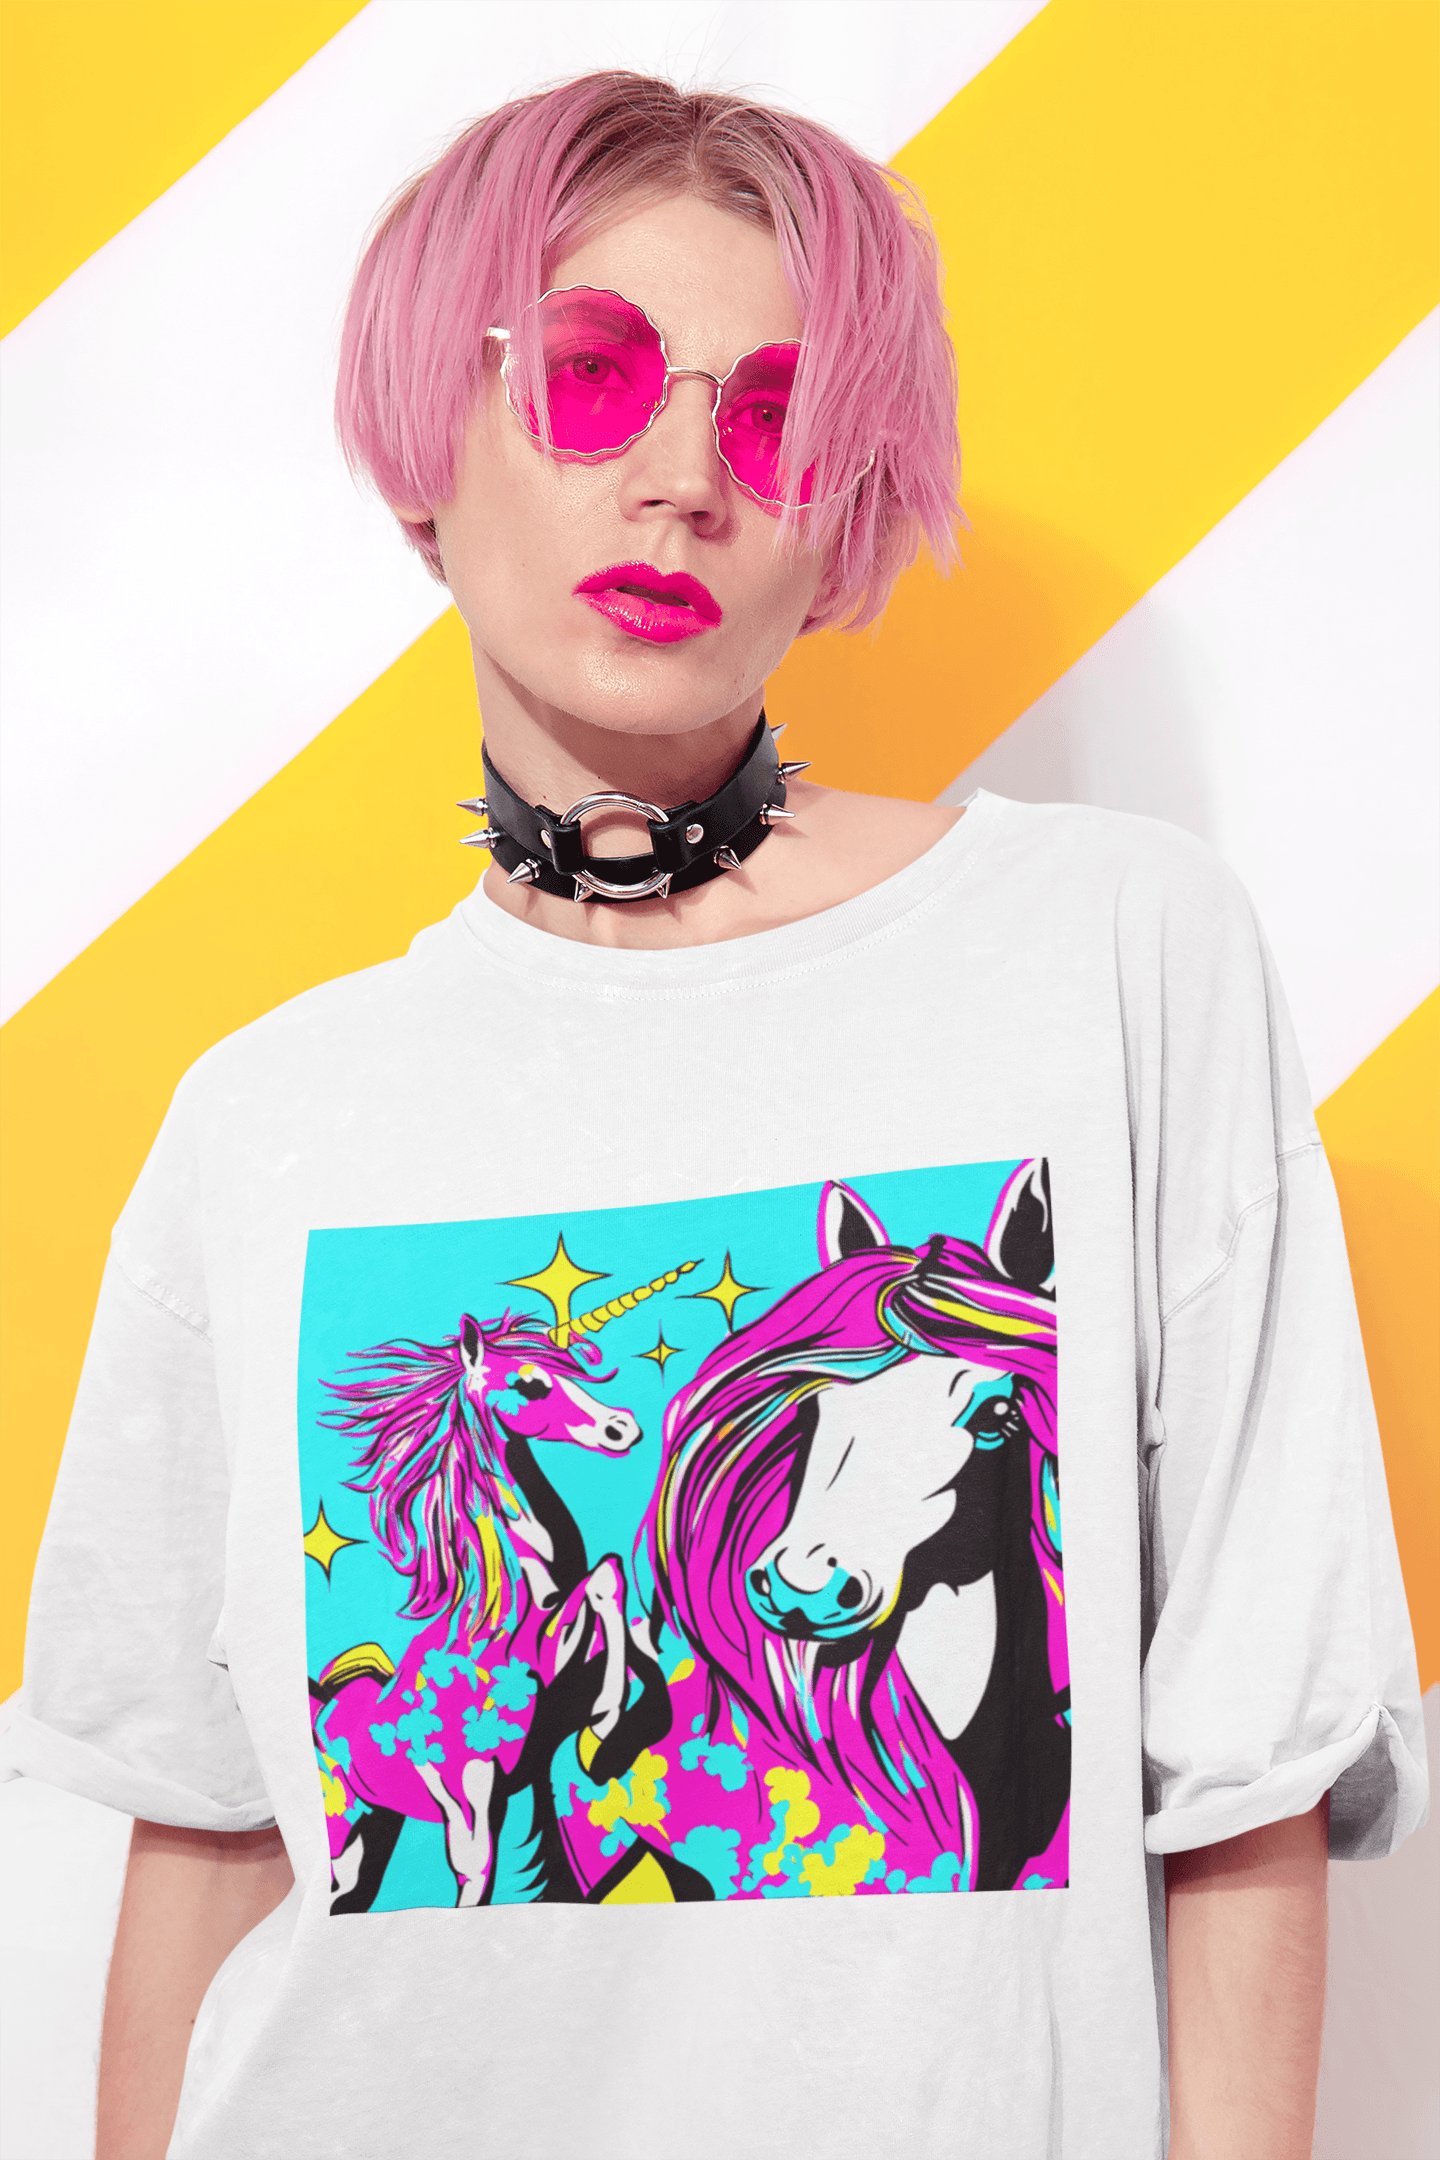 Unicorn Couture Baggy T-Shirt - The Accessorys Official